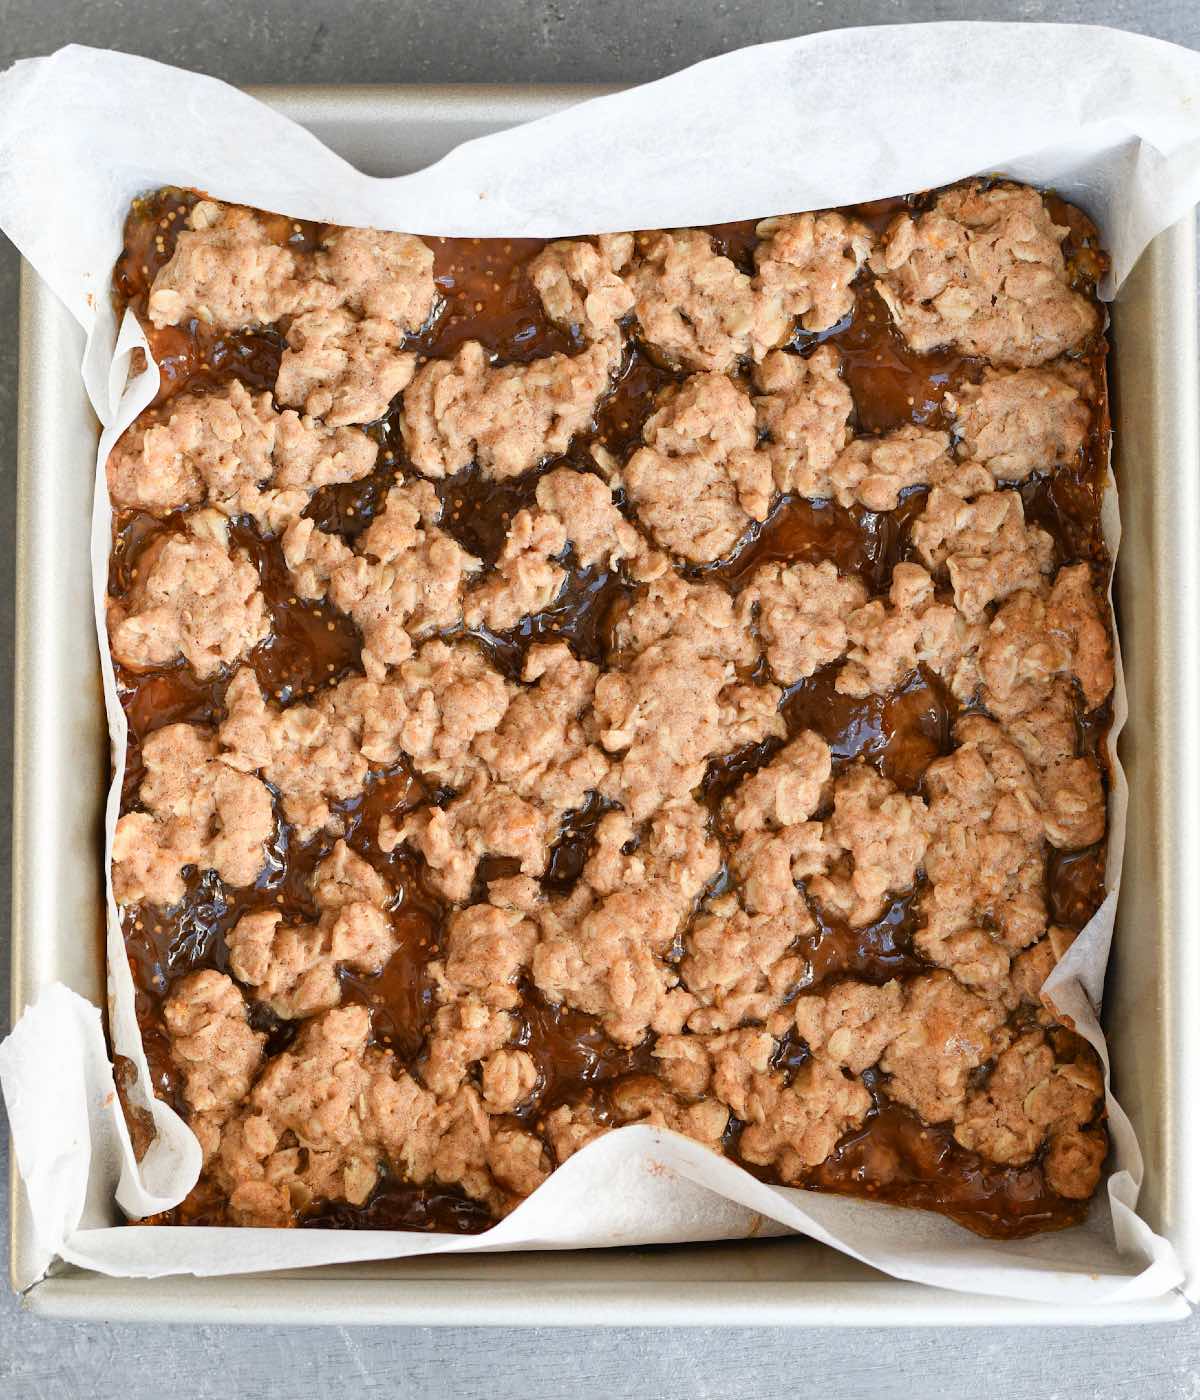 baked fig and oatmeal bars in a baking pan.